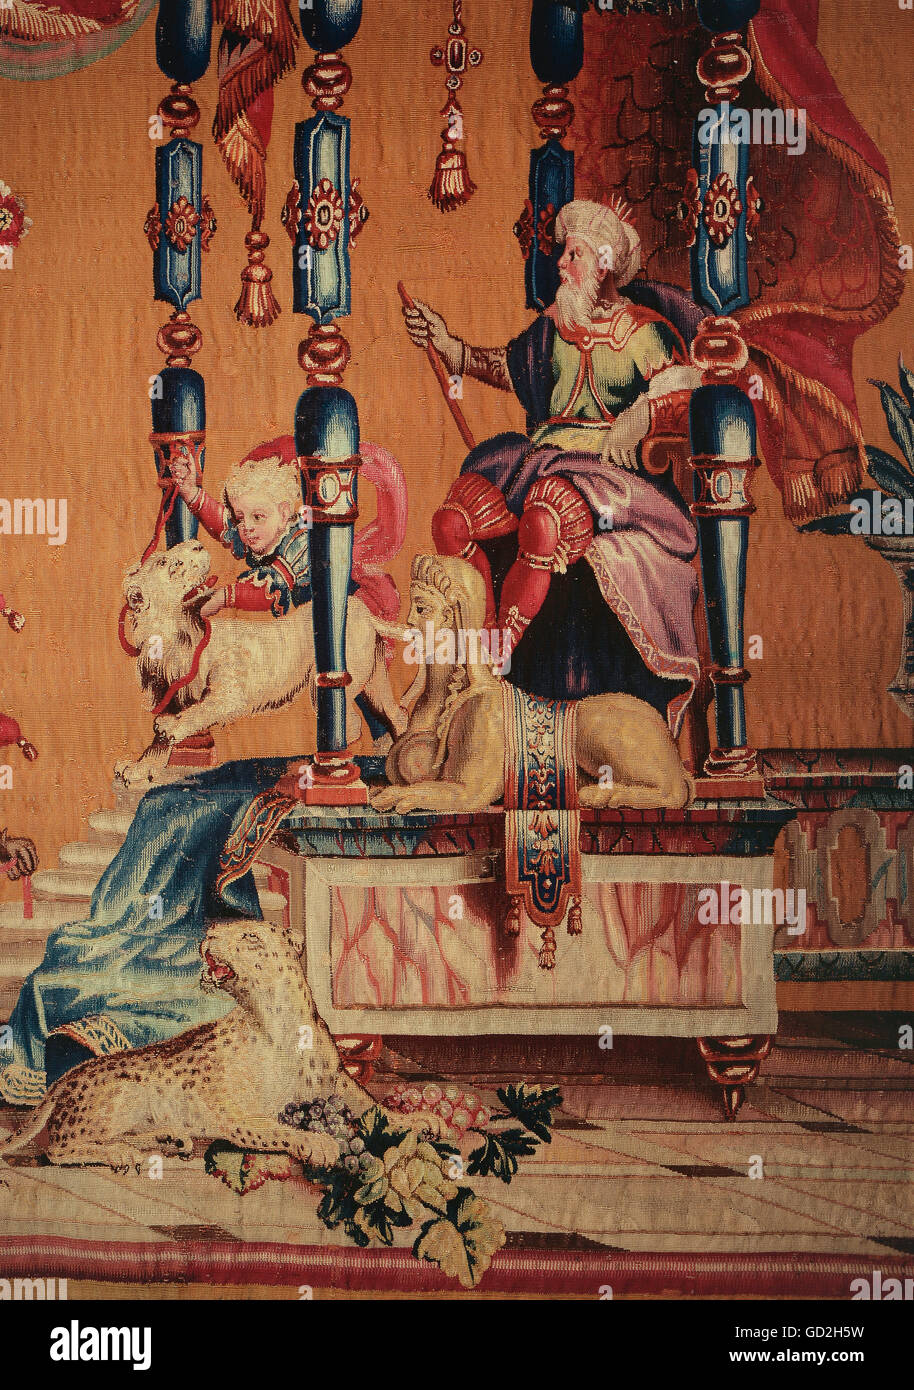 fine arts, tapestry, musicians and artist in phantastic architecture, detail, oriental prince, from the grotesques series, by Philippe Behagle, after design by Jean Berain, Beauvais manufactory, circa 1700, silk, wool, knitted, 320 x 498 cm, Baden State Museum, Bruchsal castle, Artist's Copyright has not to be cleared Stock Photo